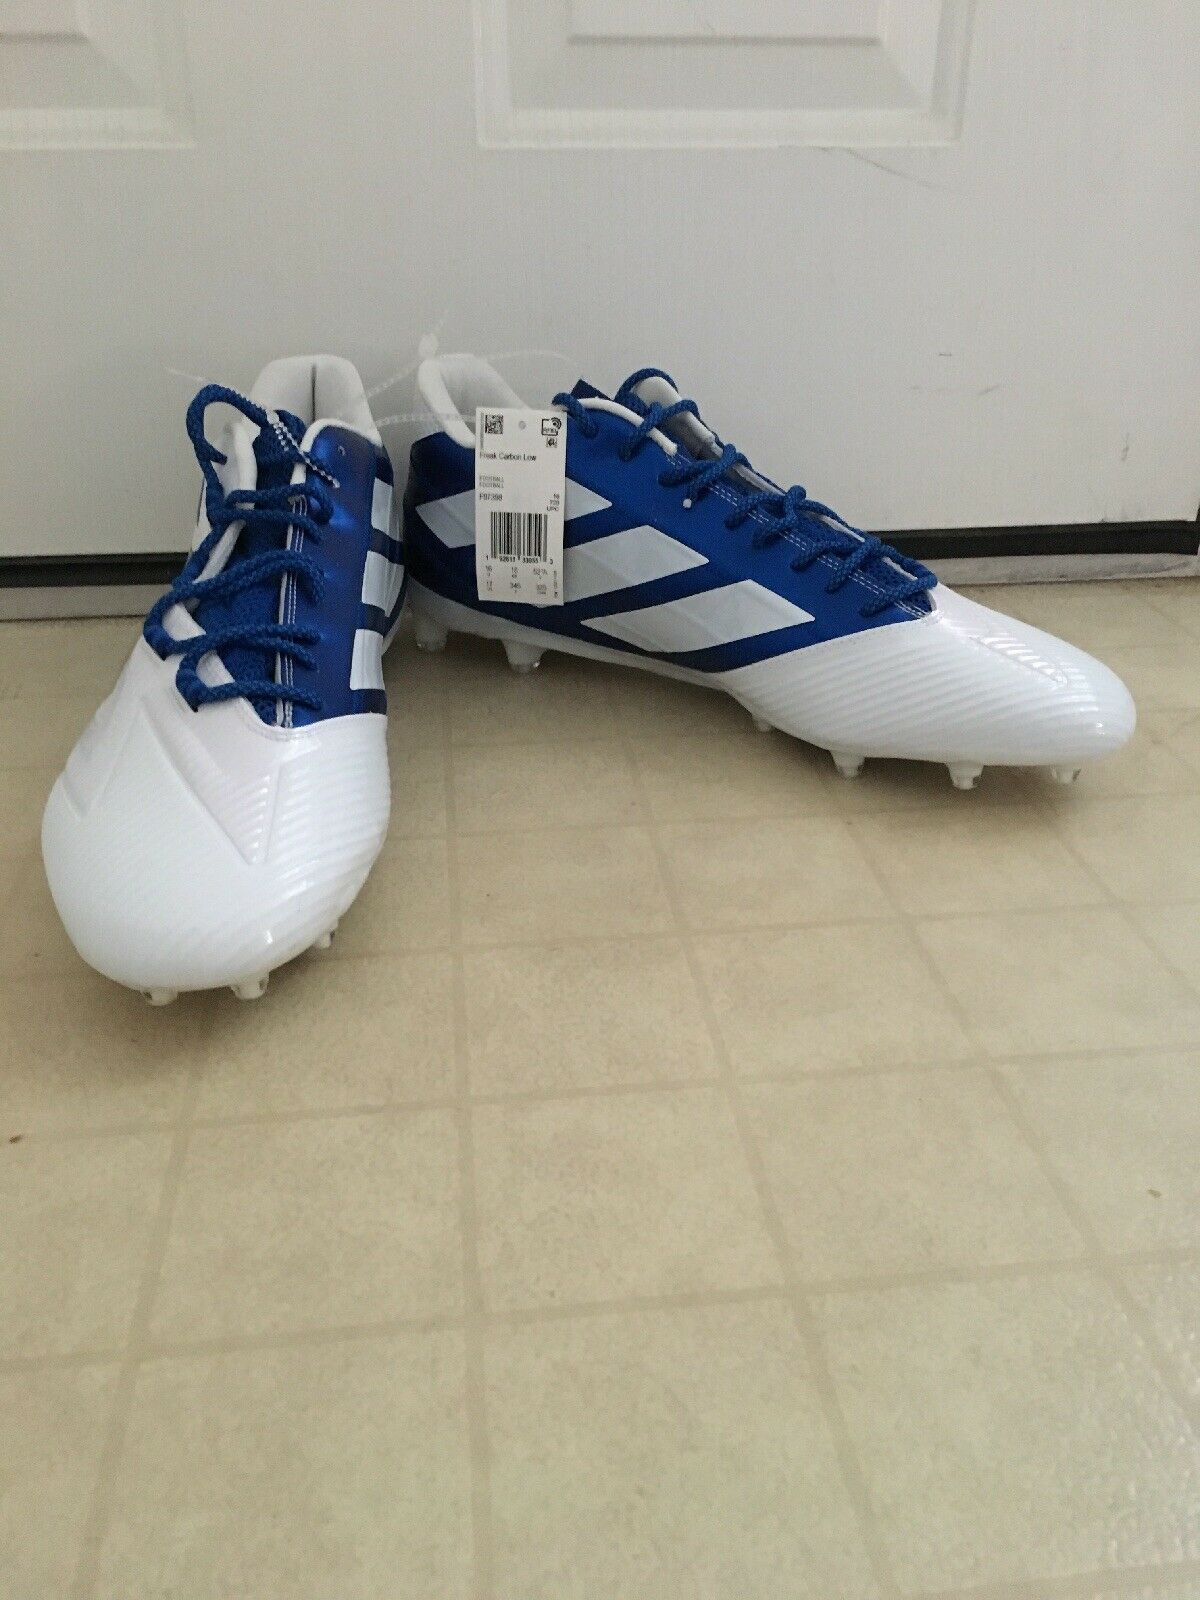 size 17 football cleats